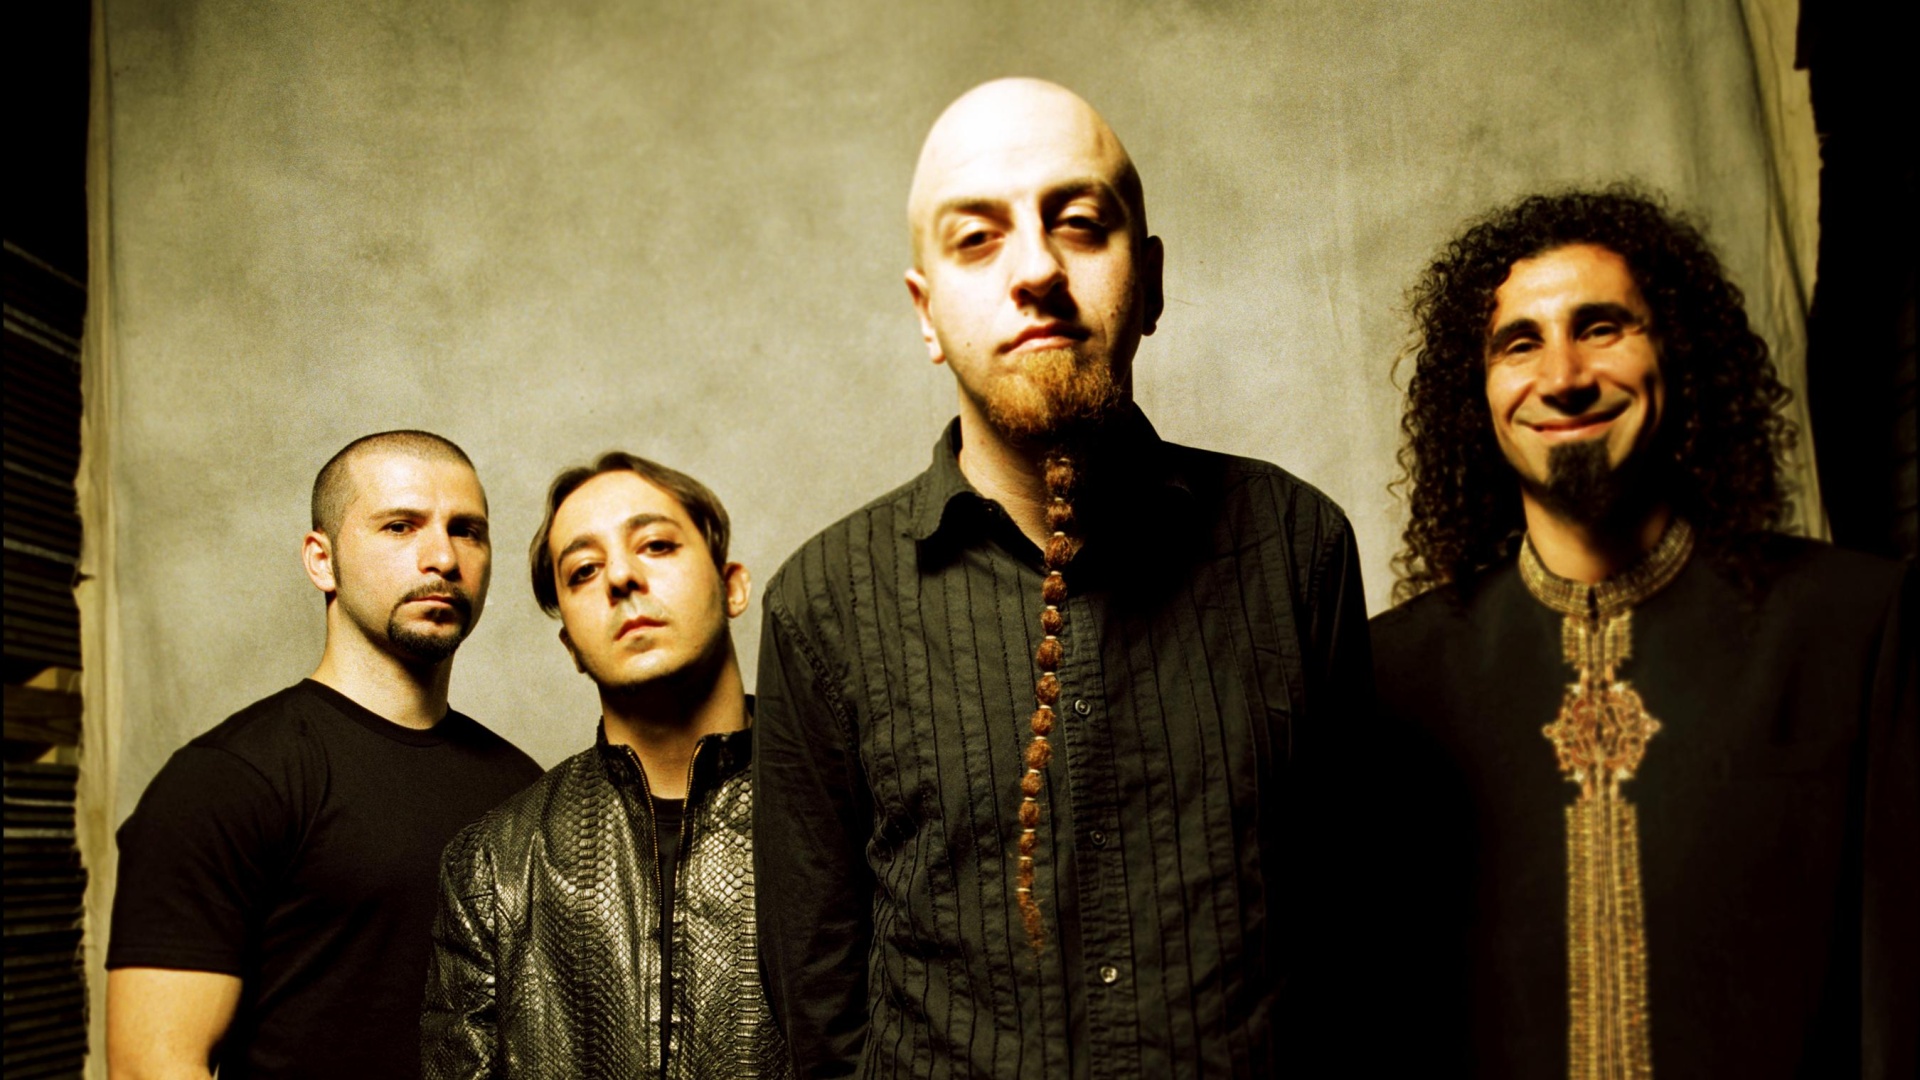 16 System Of A Down HD Wallpapers Backgrounds - Wallpaper Abyss